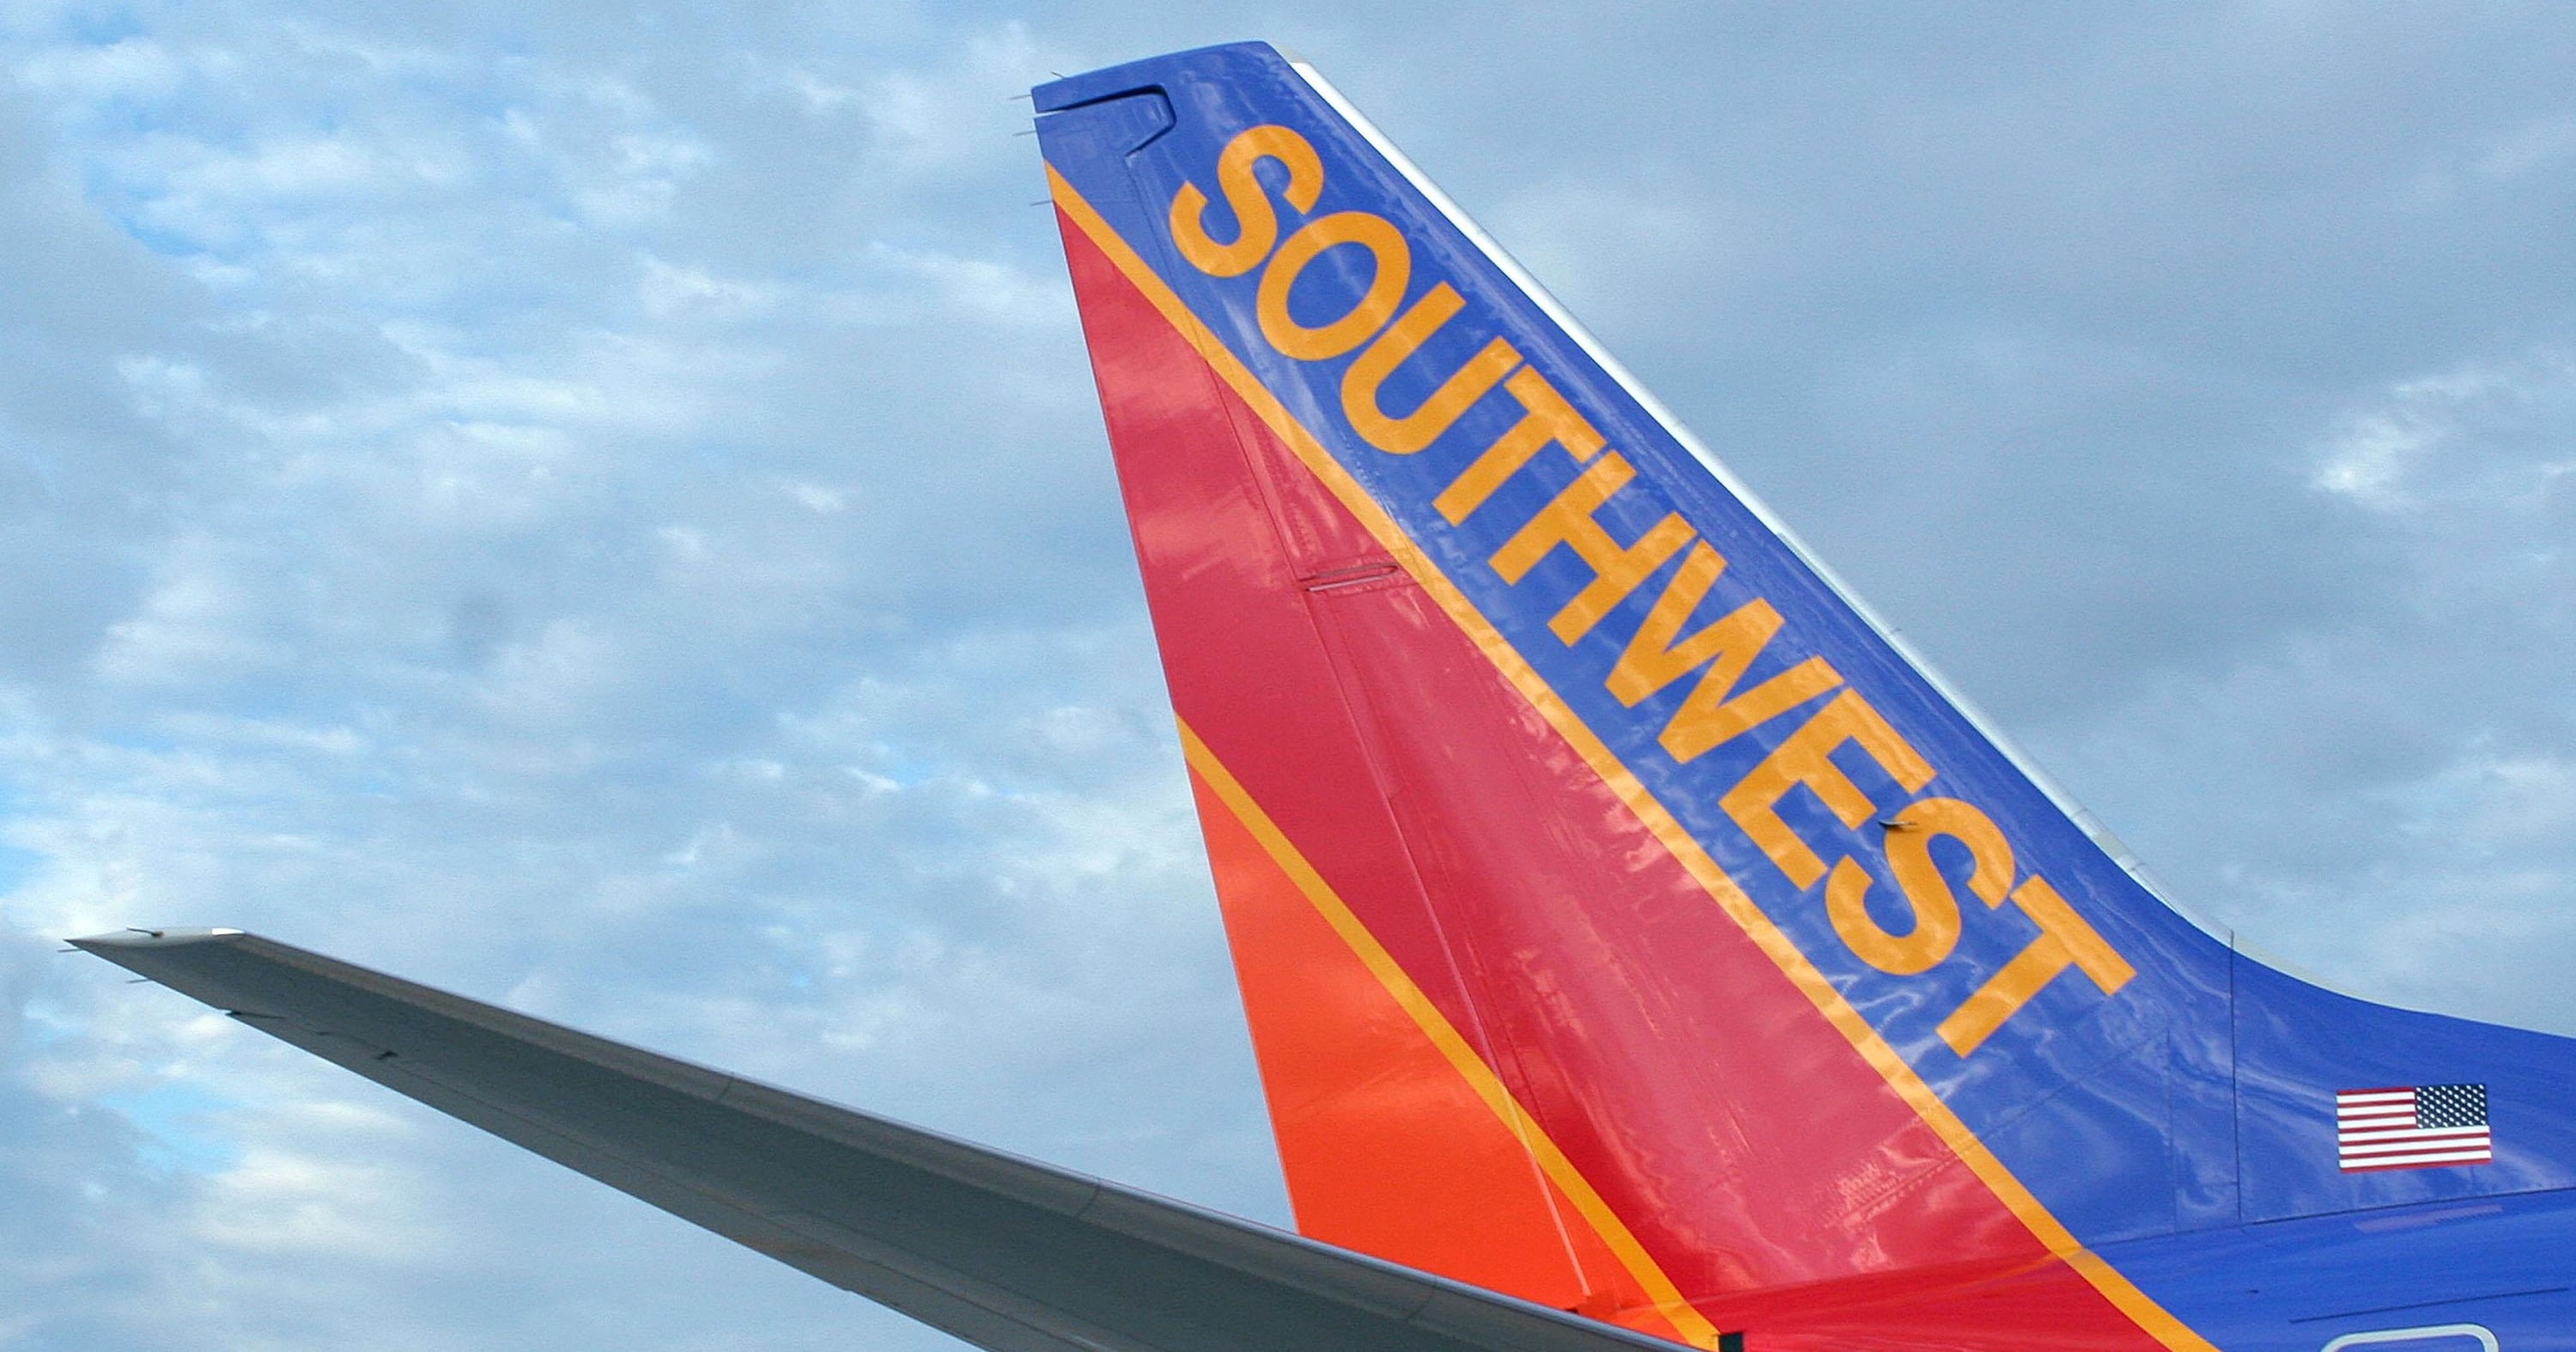 In Defense of Southwest’s Open-Seating Policy